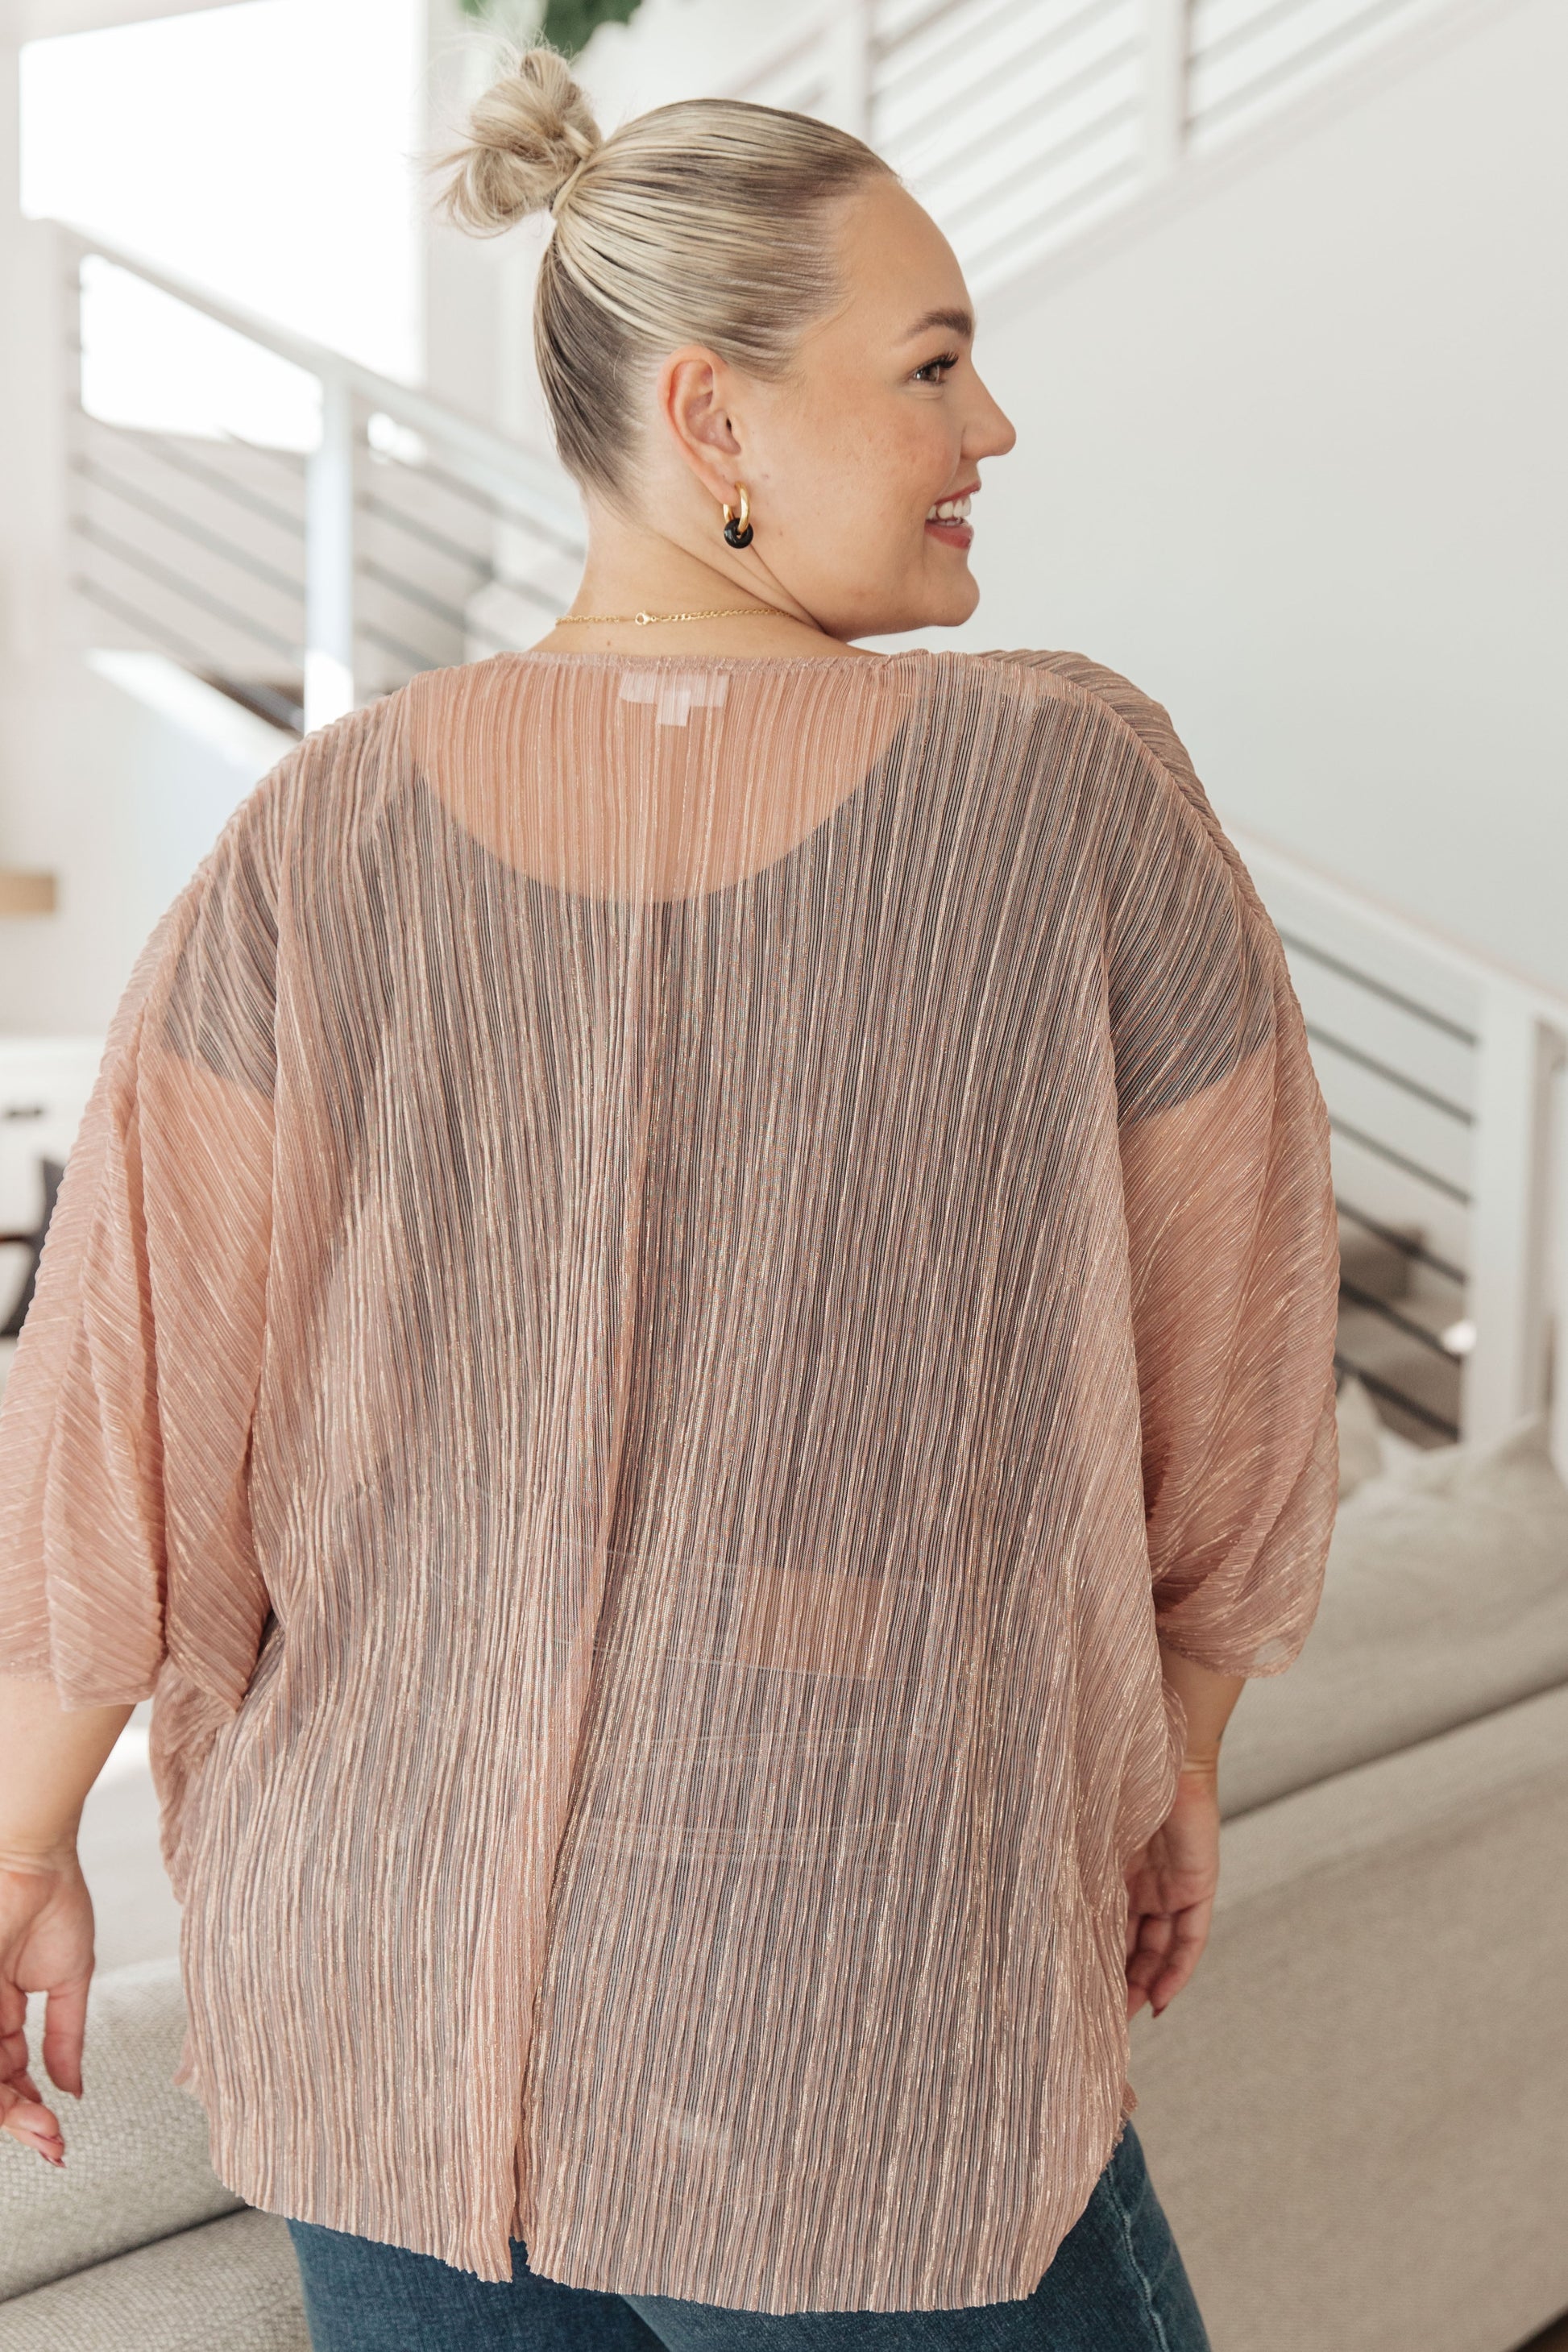 Perfect for party time, this Sheer Sign Kimono is crafted of sheer accordion fabric with lurex thread accents for a stunning shimmer. Its open front design and full-length silhouette will ensure you look your best for your next cocktail hour. S - 3X